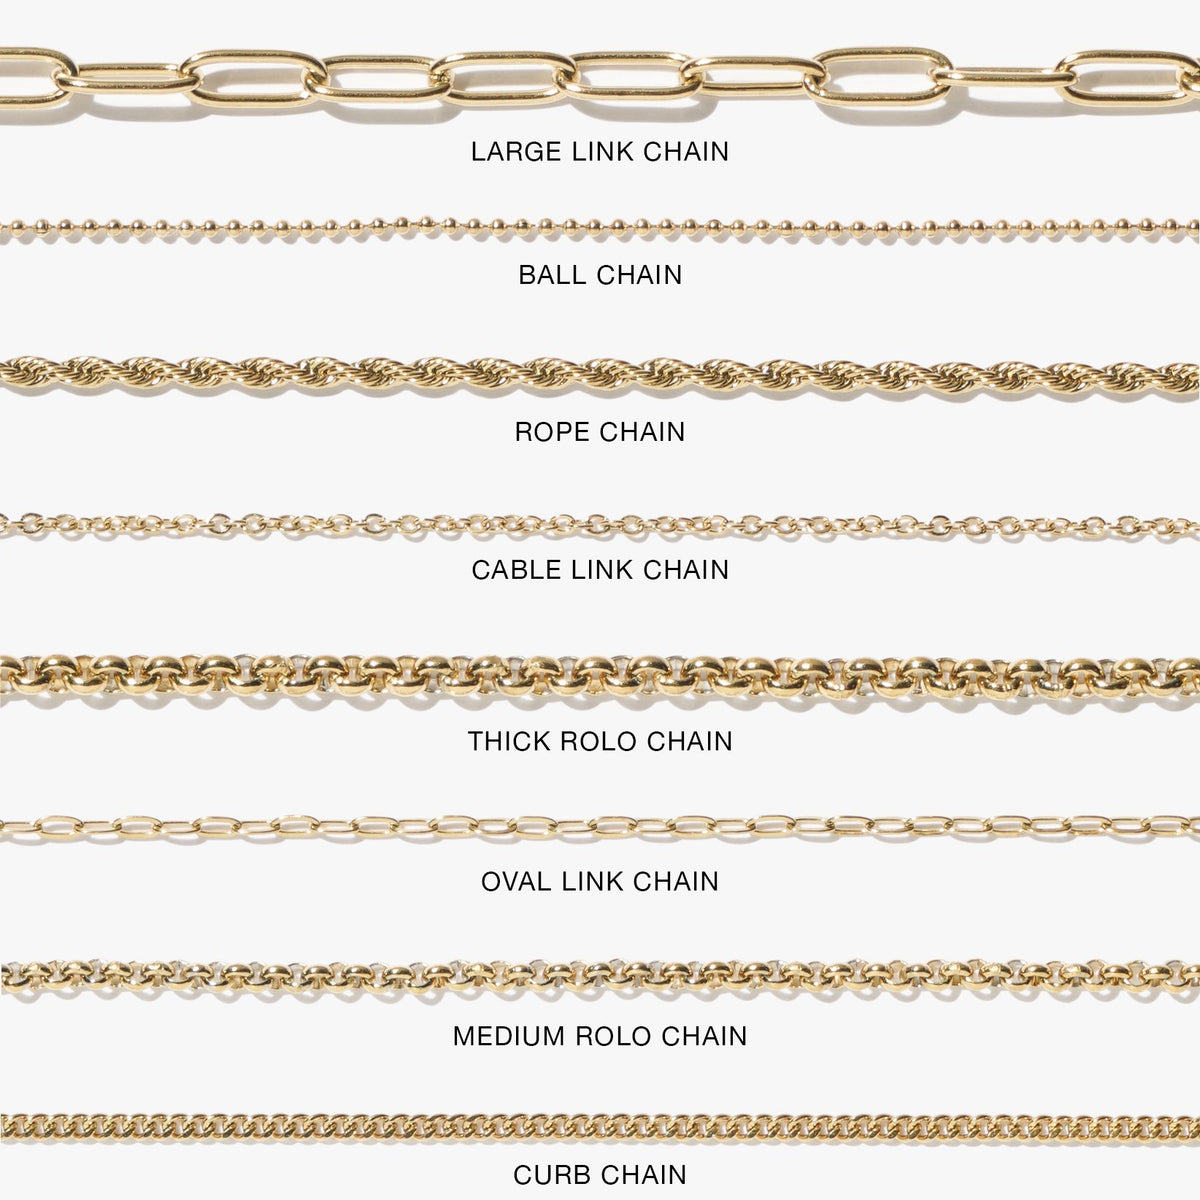 Thick Rolo Chain – Ready-Made